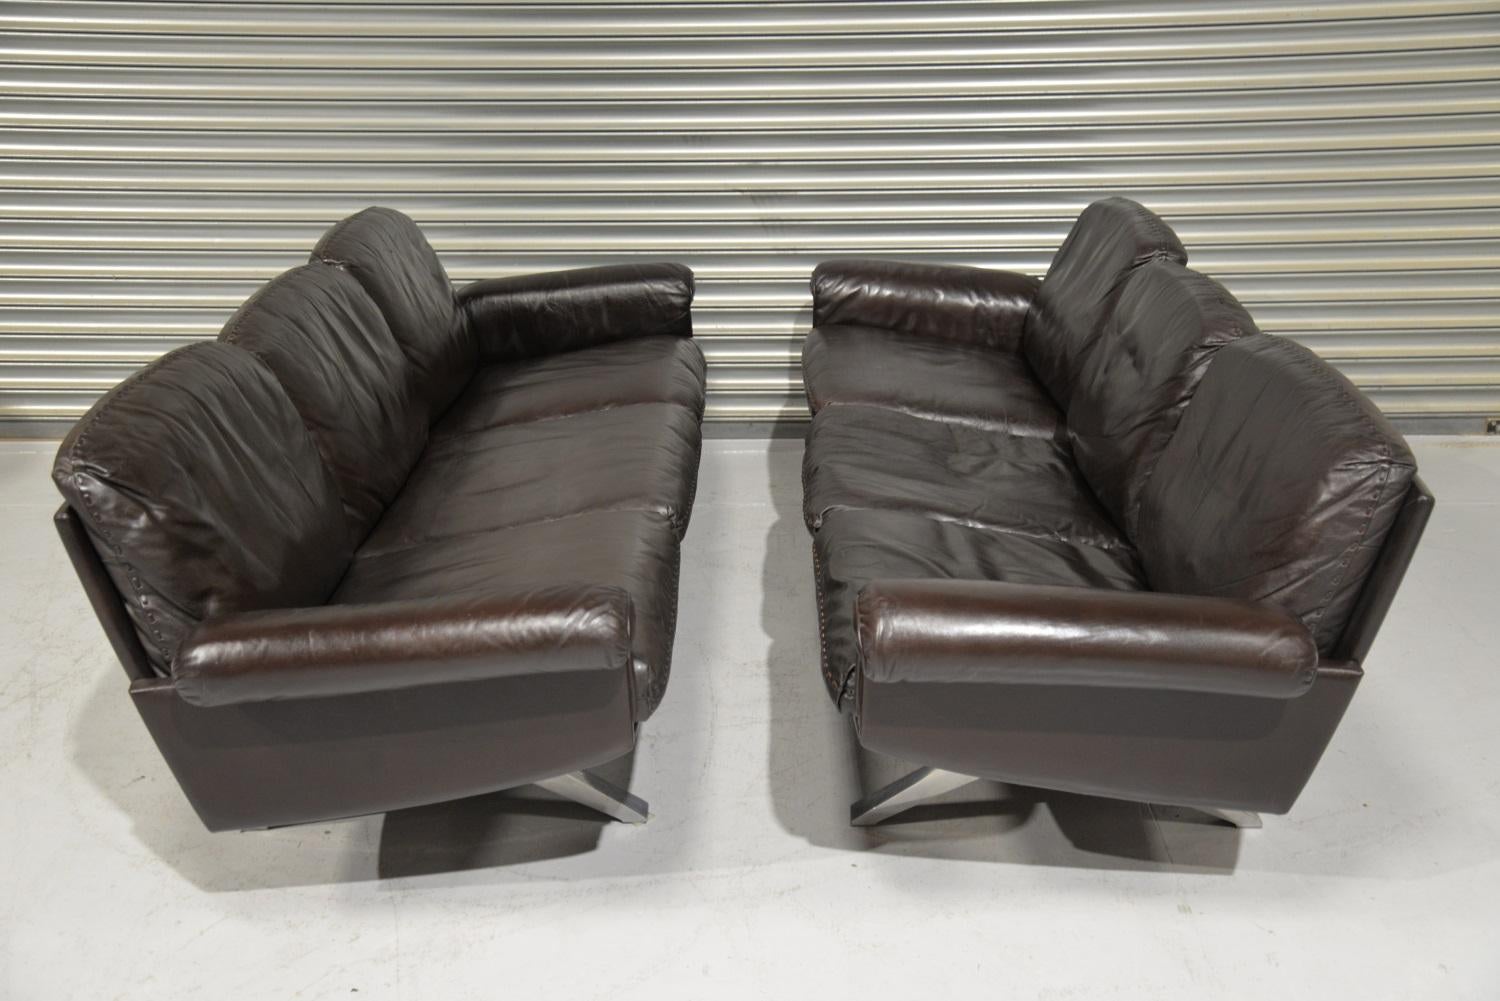 We are delighted to bring to you a pair of vintage De Sede DS 31 three-seat sofas. This Classic combination were hand built in the early 1970s by De Sede craftsman from Switzerland. These extremely comfortable vintage three-seat sofas are brought to